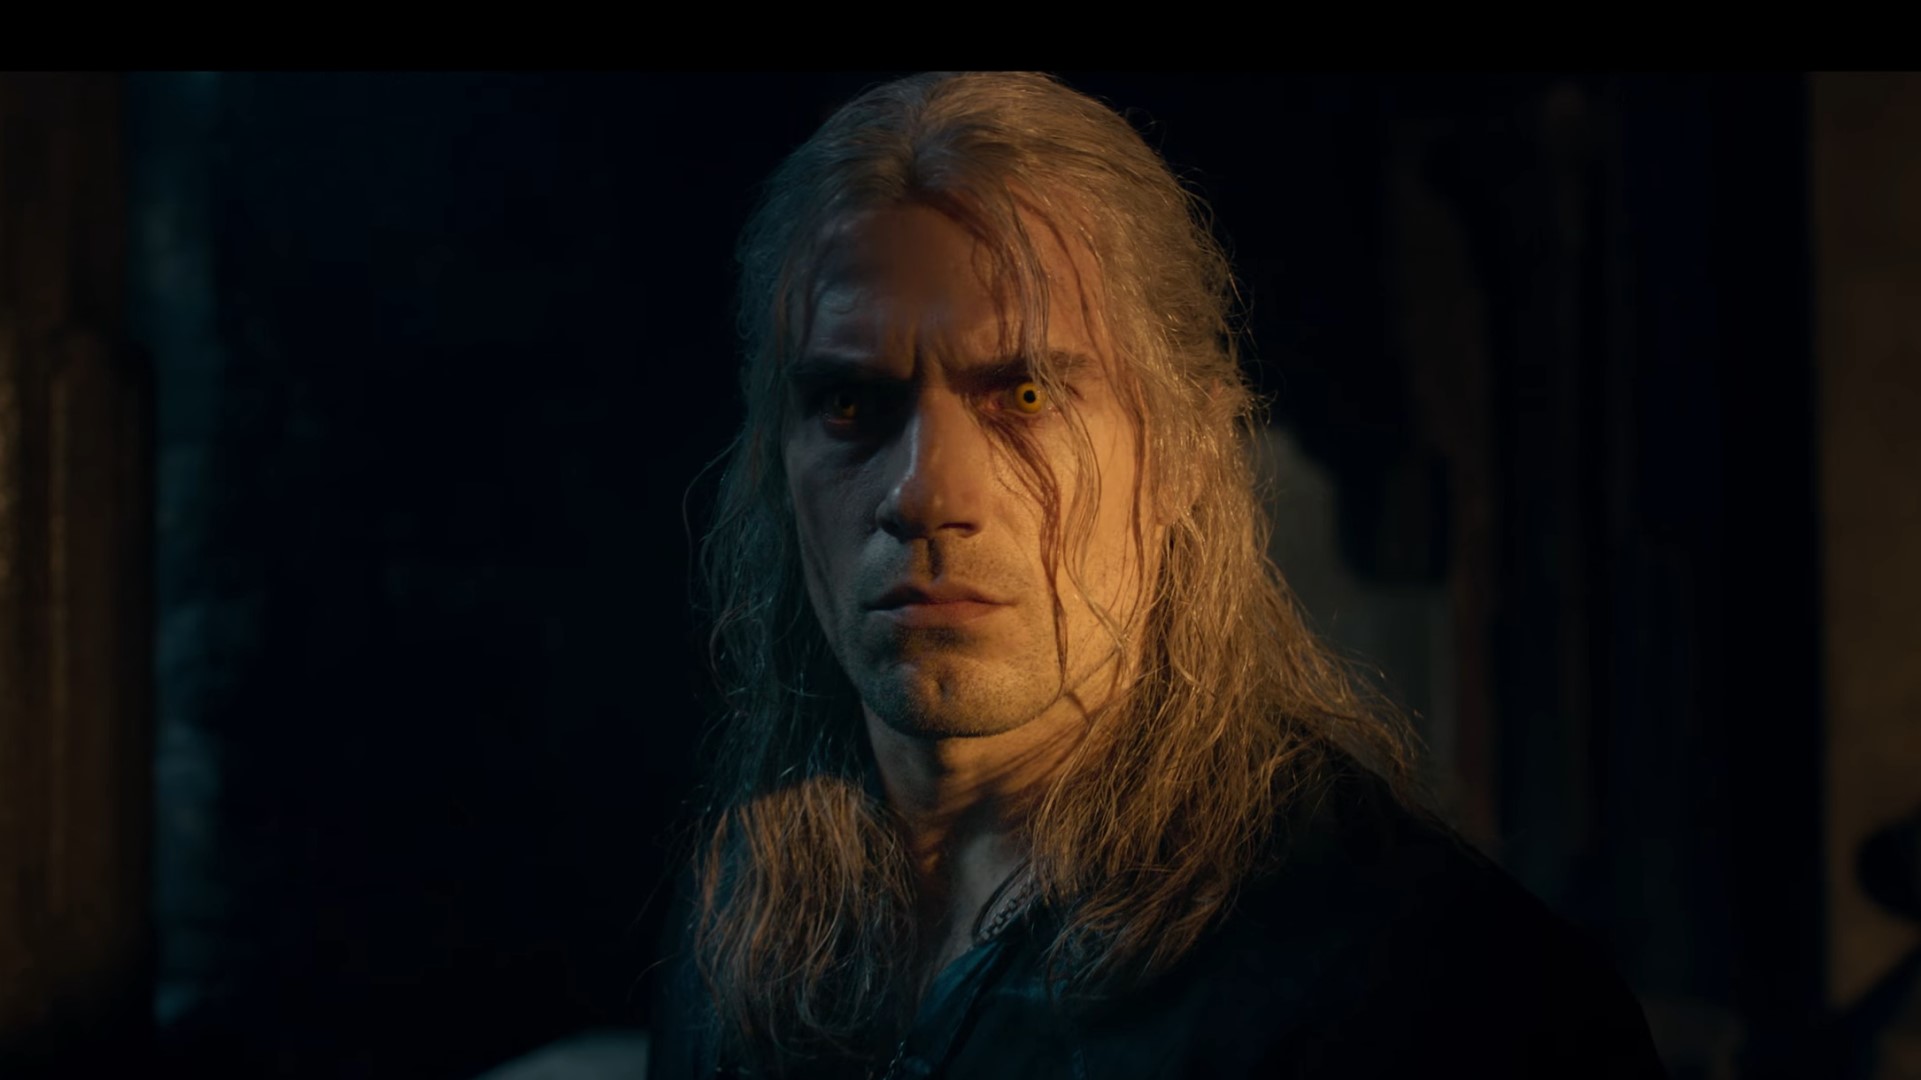 Netflix's Witcher Season 2 debuts a new trailer full of beasts and battles